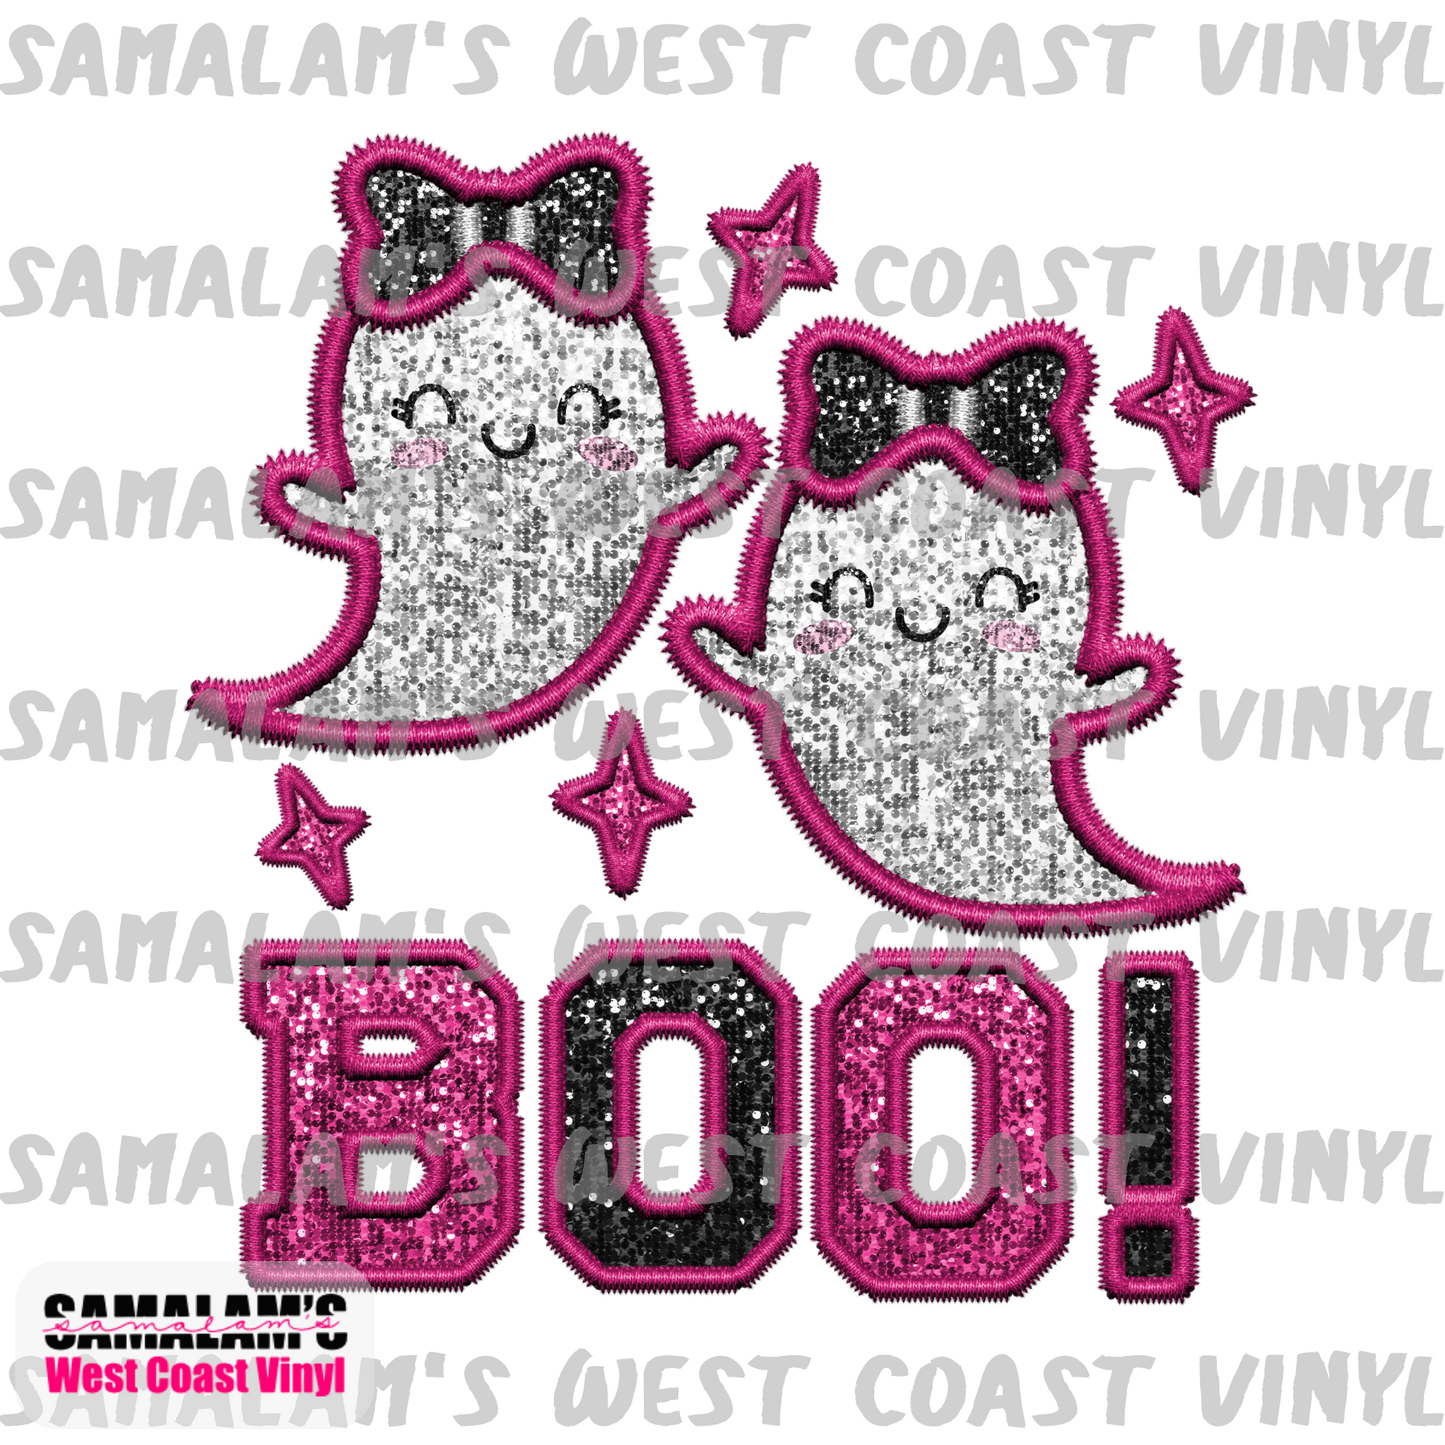 Embroidery - Boo - Pink Black - Clear Cast Decal